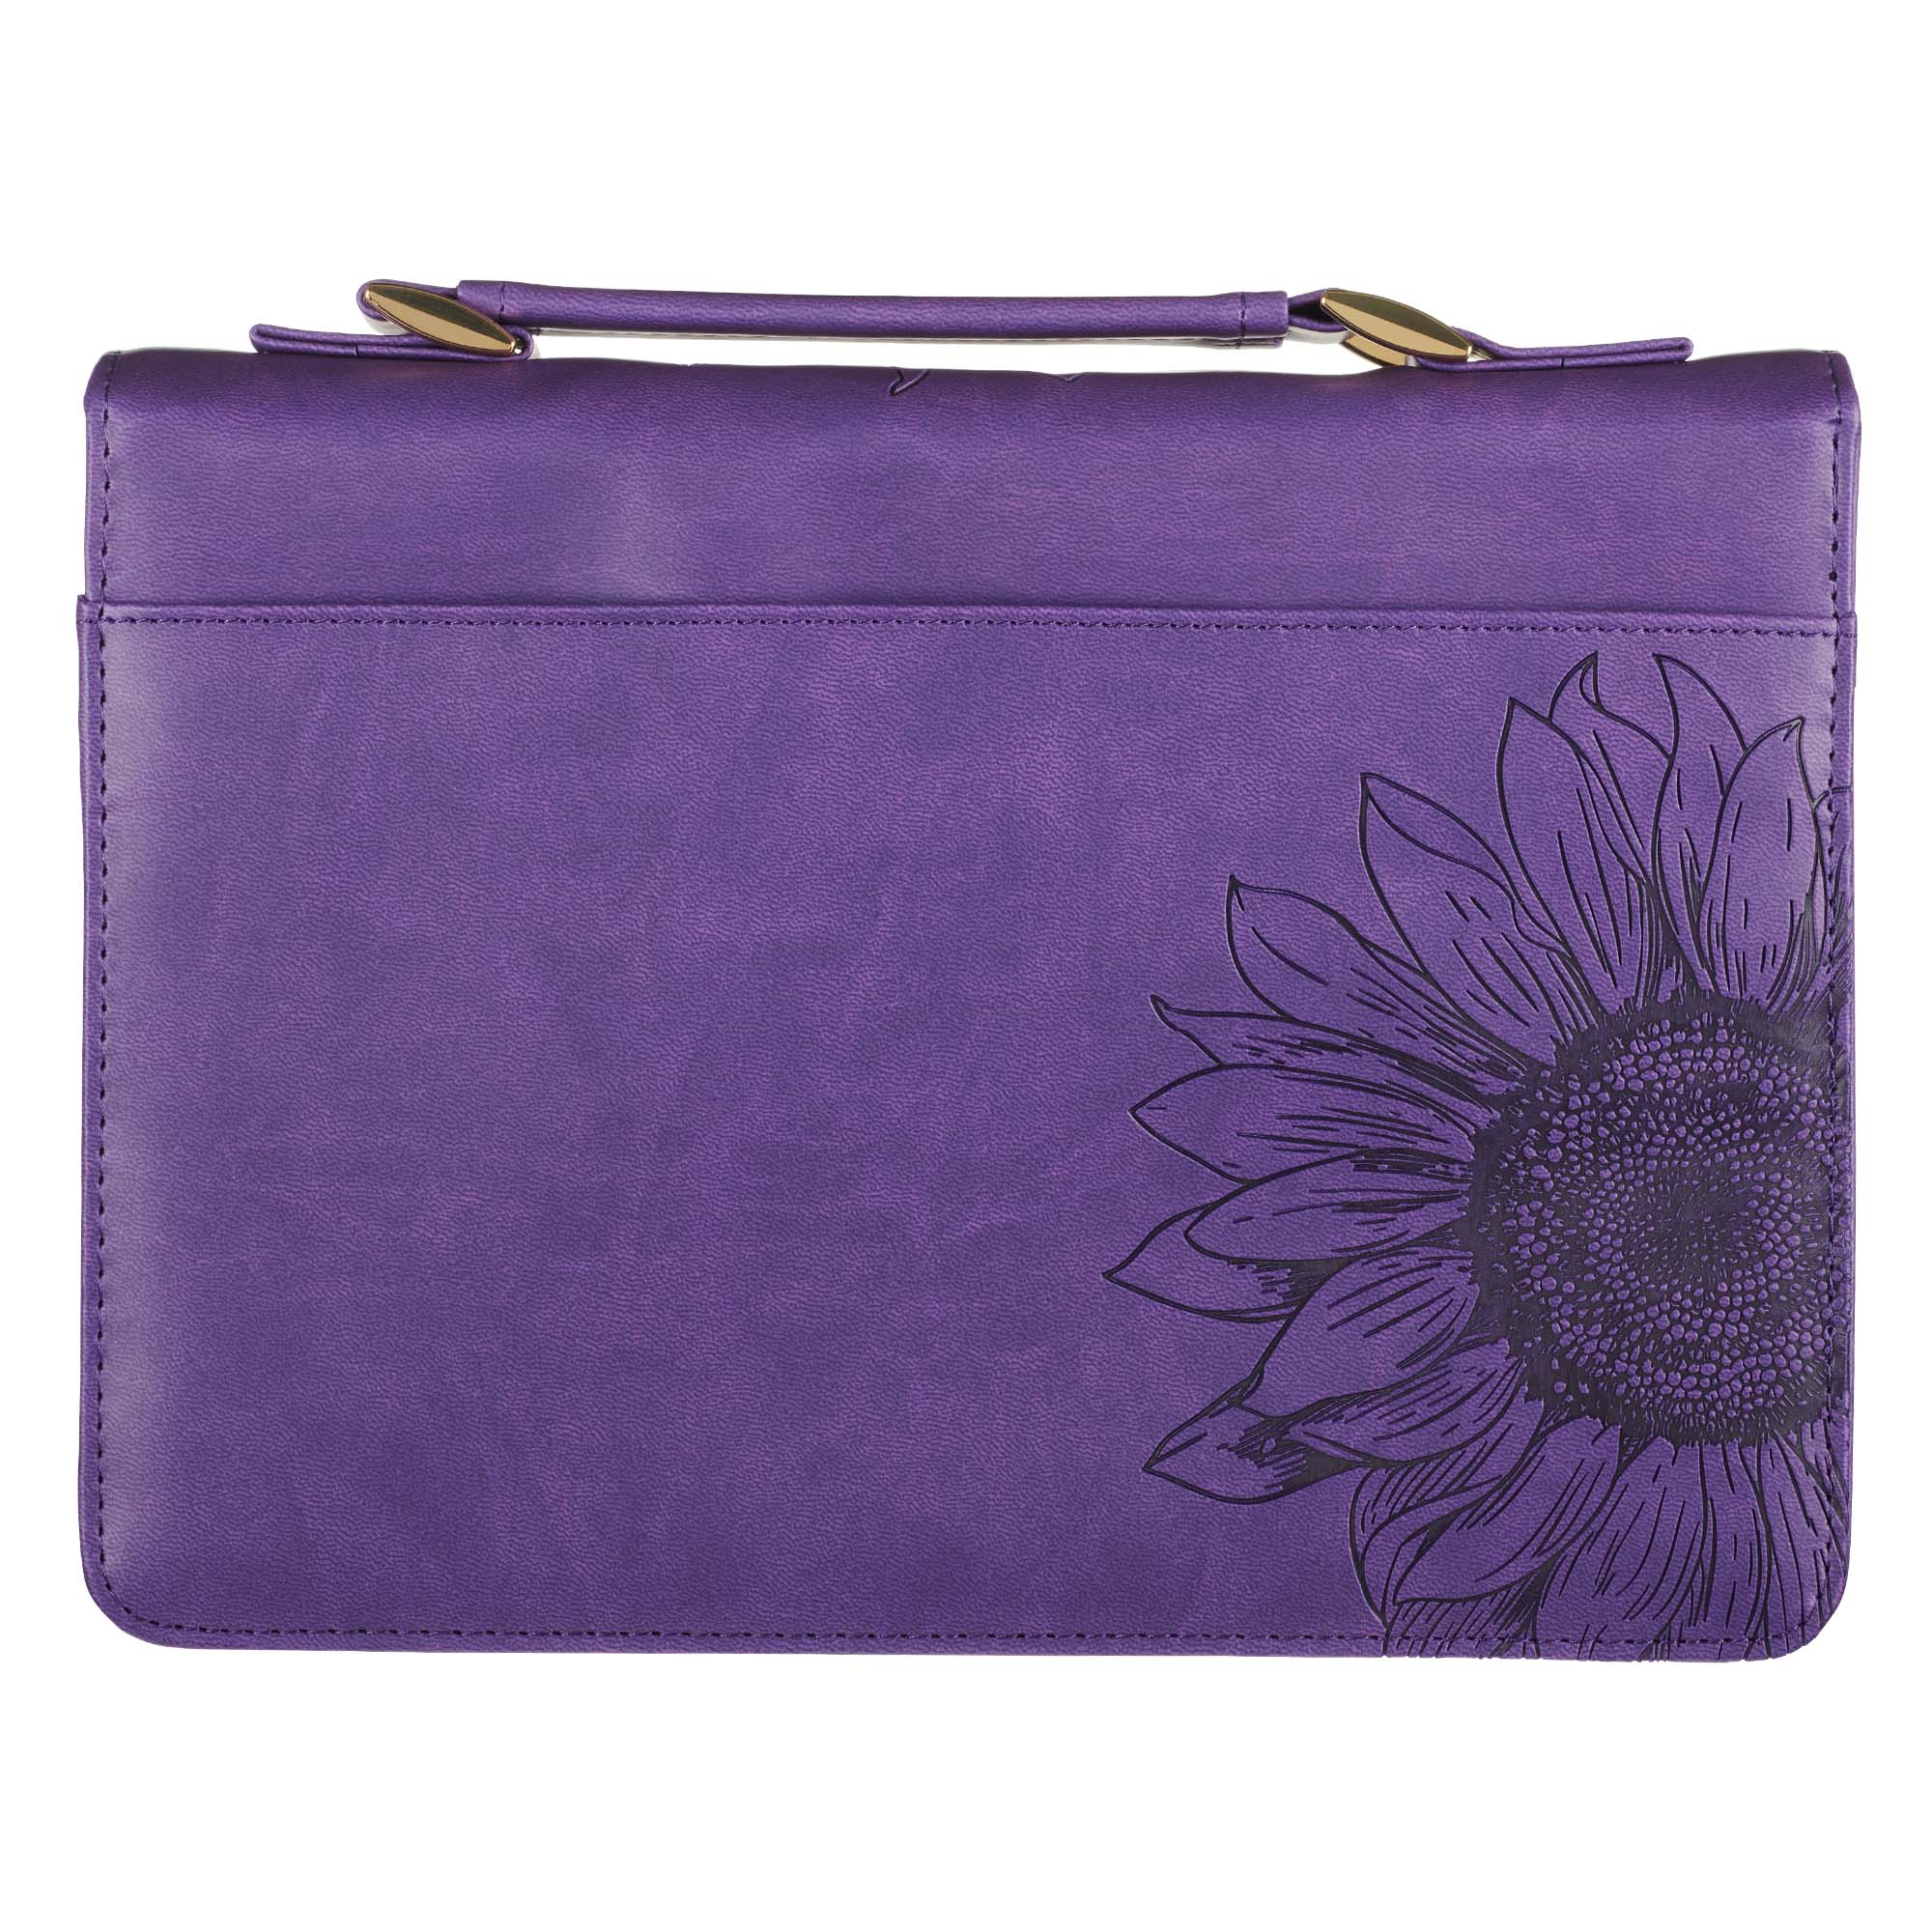 Purse-Style Bible Cover - Blessed Purple Floral – KI GIFTS